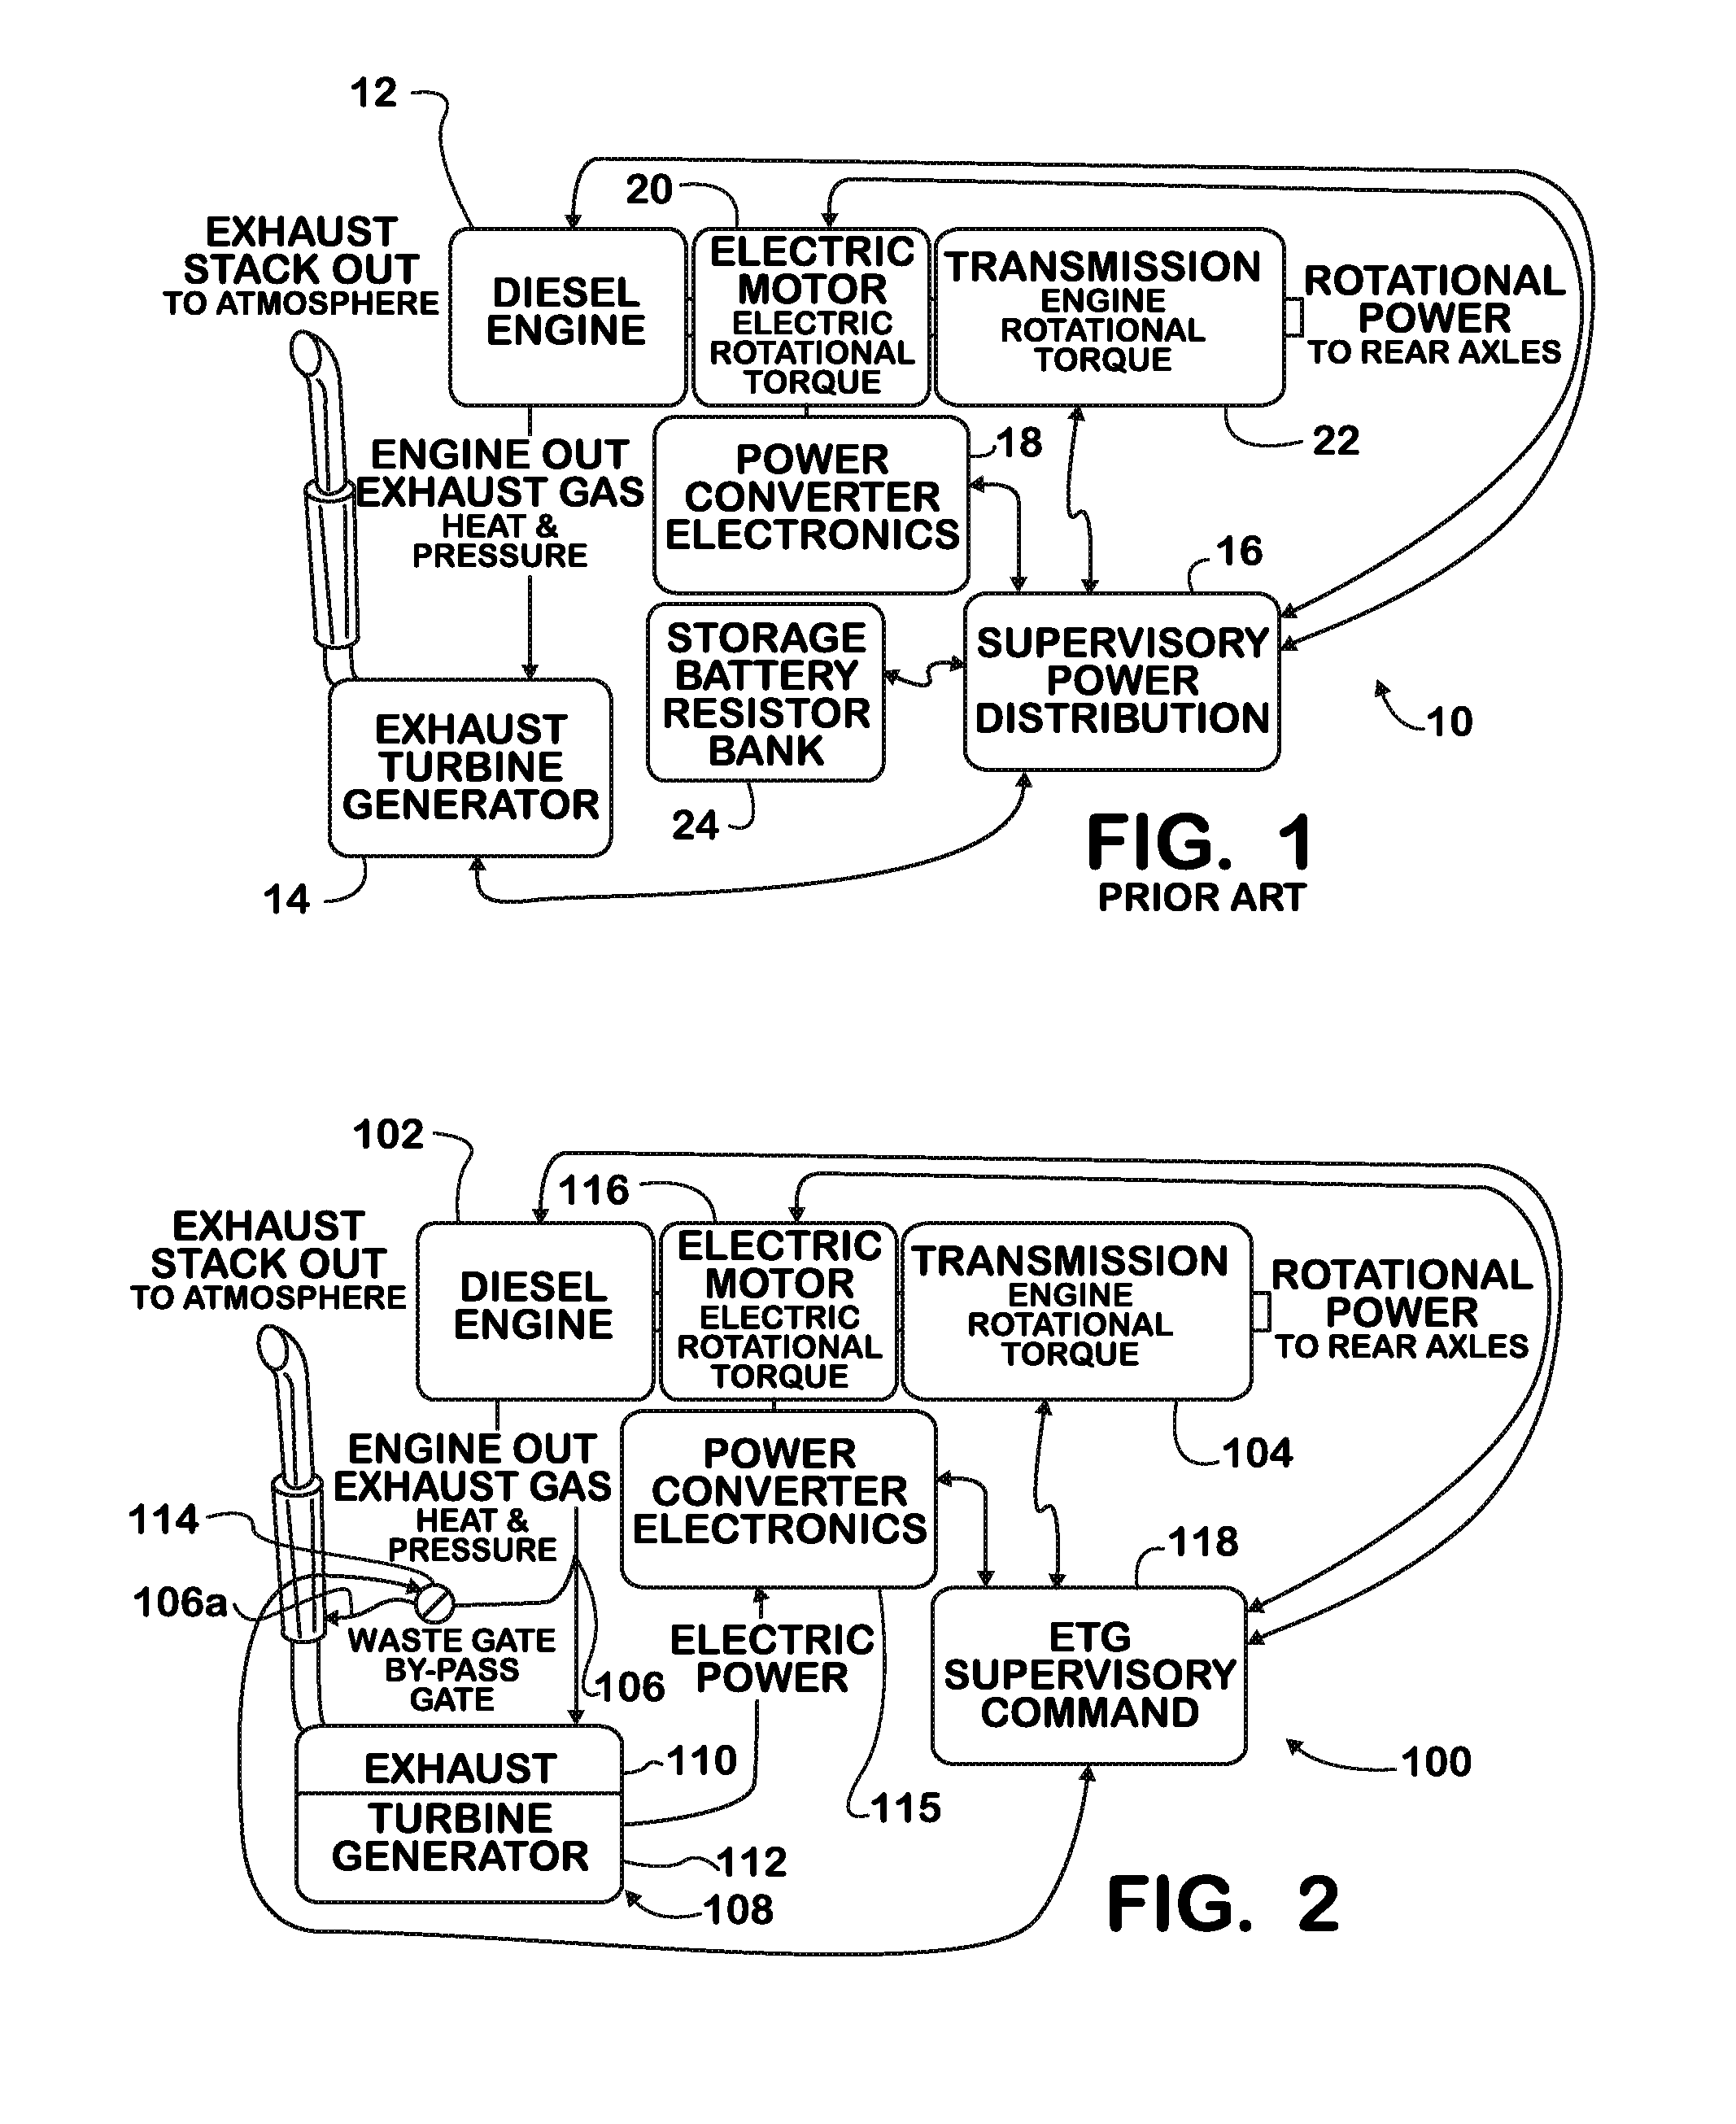 System and method for exporting a vehicle on-board ac power to a second vehicle